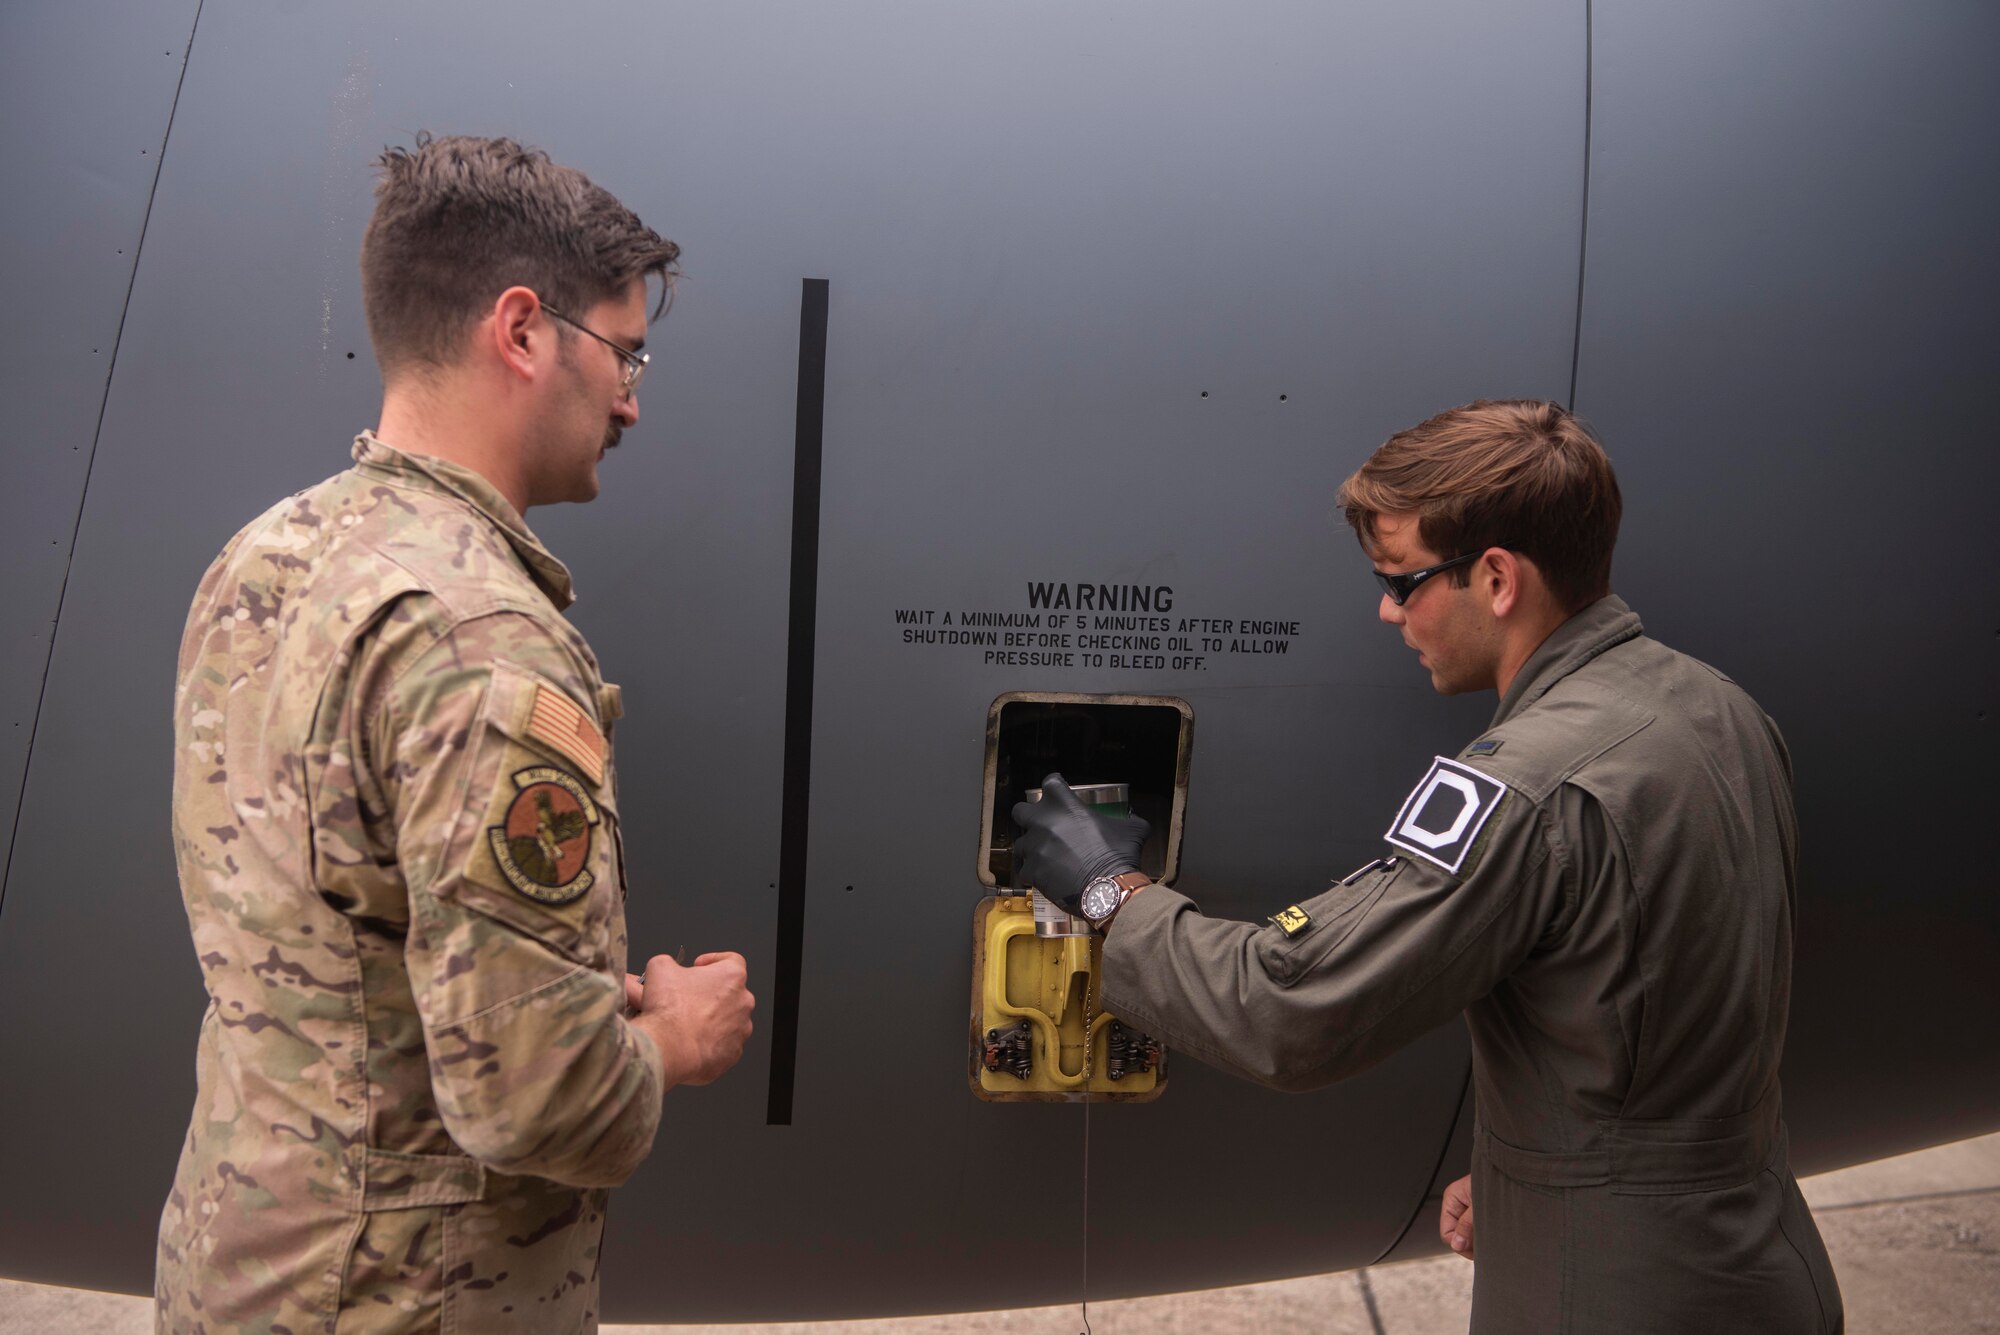 U.S. Air Force Staff Sgt. Lance Whisenhunt, 100th Aircraft Maintenance Squadron flying crew chief, left, oversees 1st Lt. Bradley Mokris, 351st Air Refueling Squadron pilot, service the oil of a  KC-135 Stratotanker aircraft during Exercise Wolff Pack at Royal Air Force Mildenhall, England, Sept. 30, 2020. The exercise developed multi-capable Airmen who can accomplish duties outside of their typical responsibilities in support of the mission. (U.S. Air Force photo by Airman 1st Class Joseph Barron)